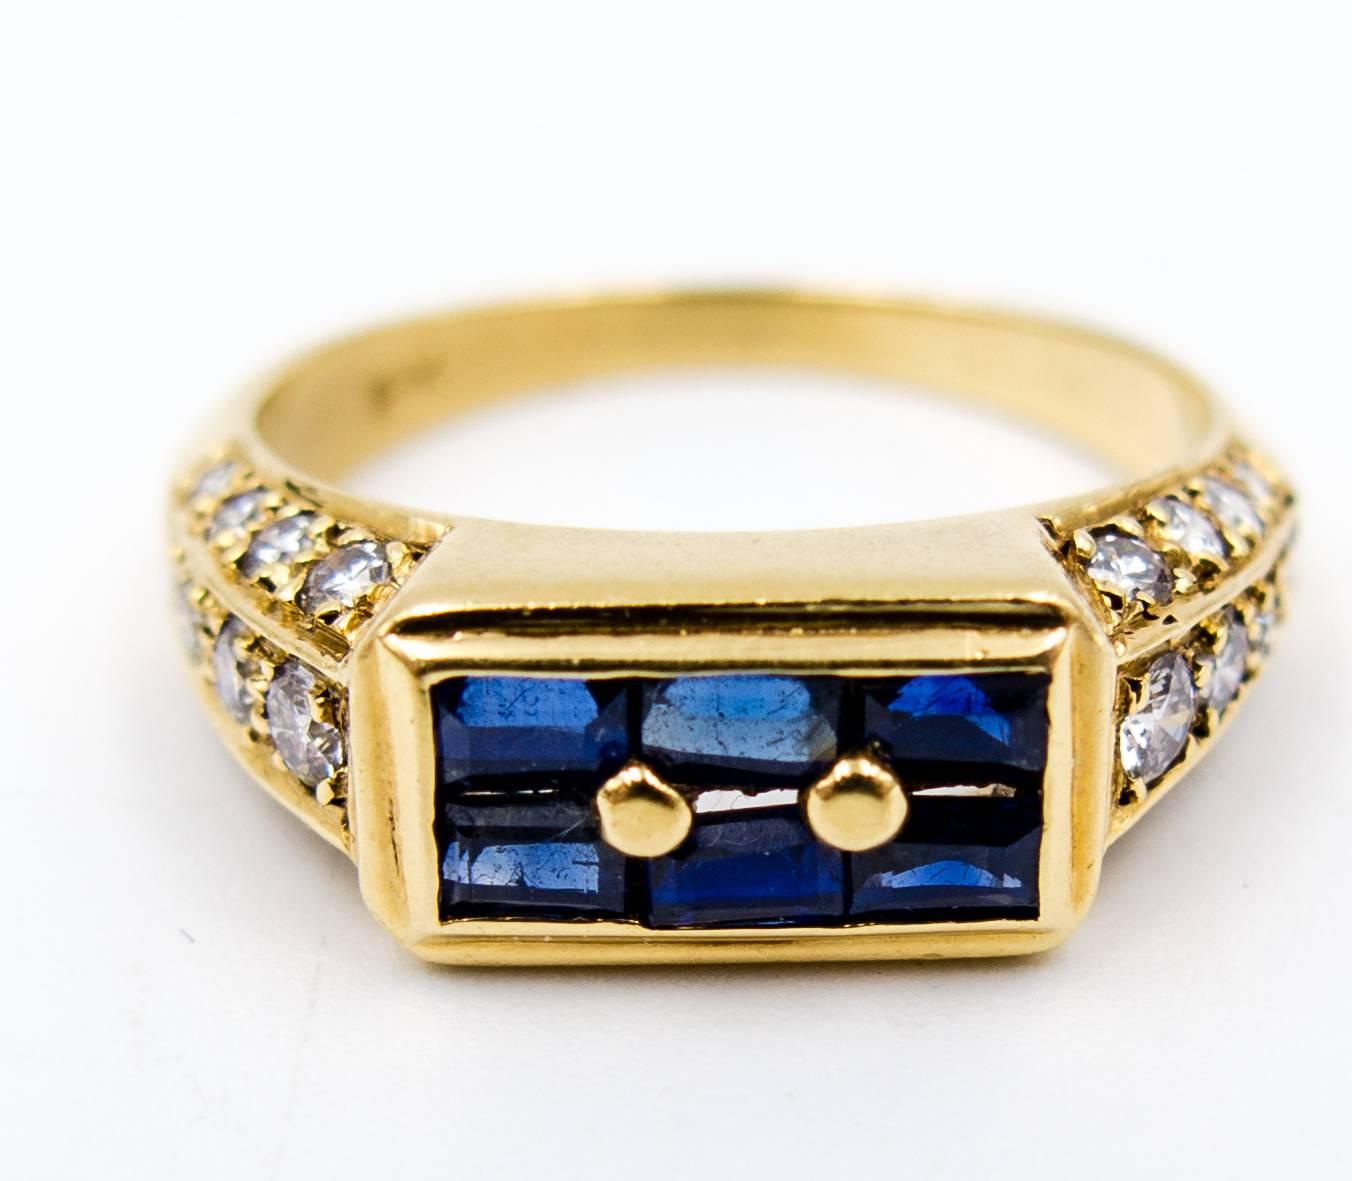 An eminently wearable sapphire and diamond ring simply because the setting of the stones has no visible prongs that can be accidentally lifted during normal wear.   Six rich color emerald cut blue sapphires sit at the top, anchored by small